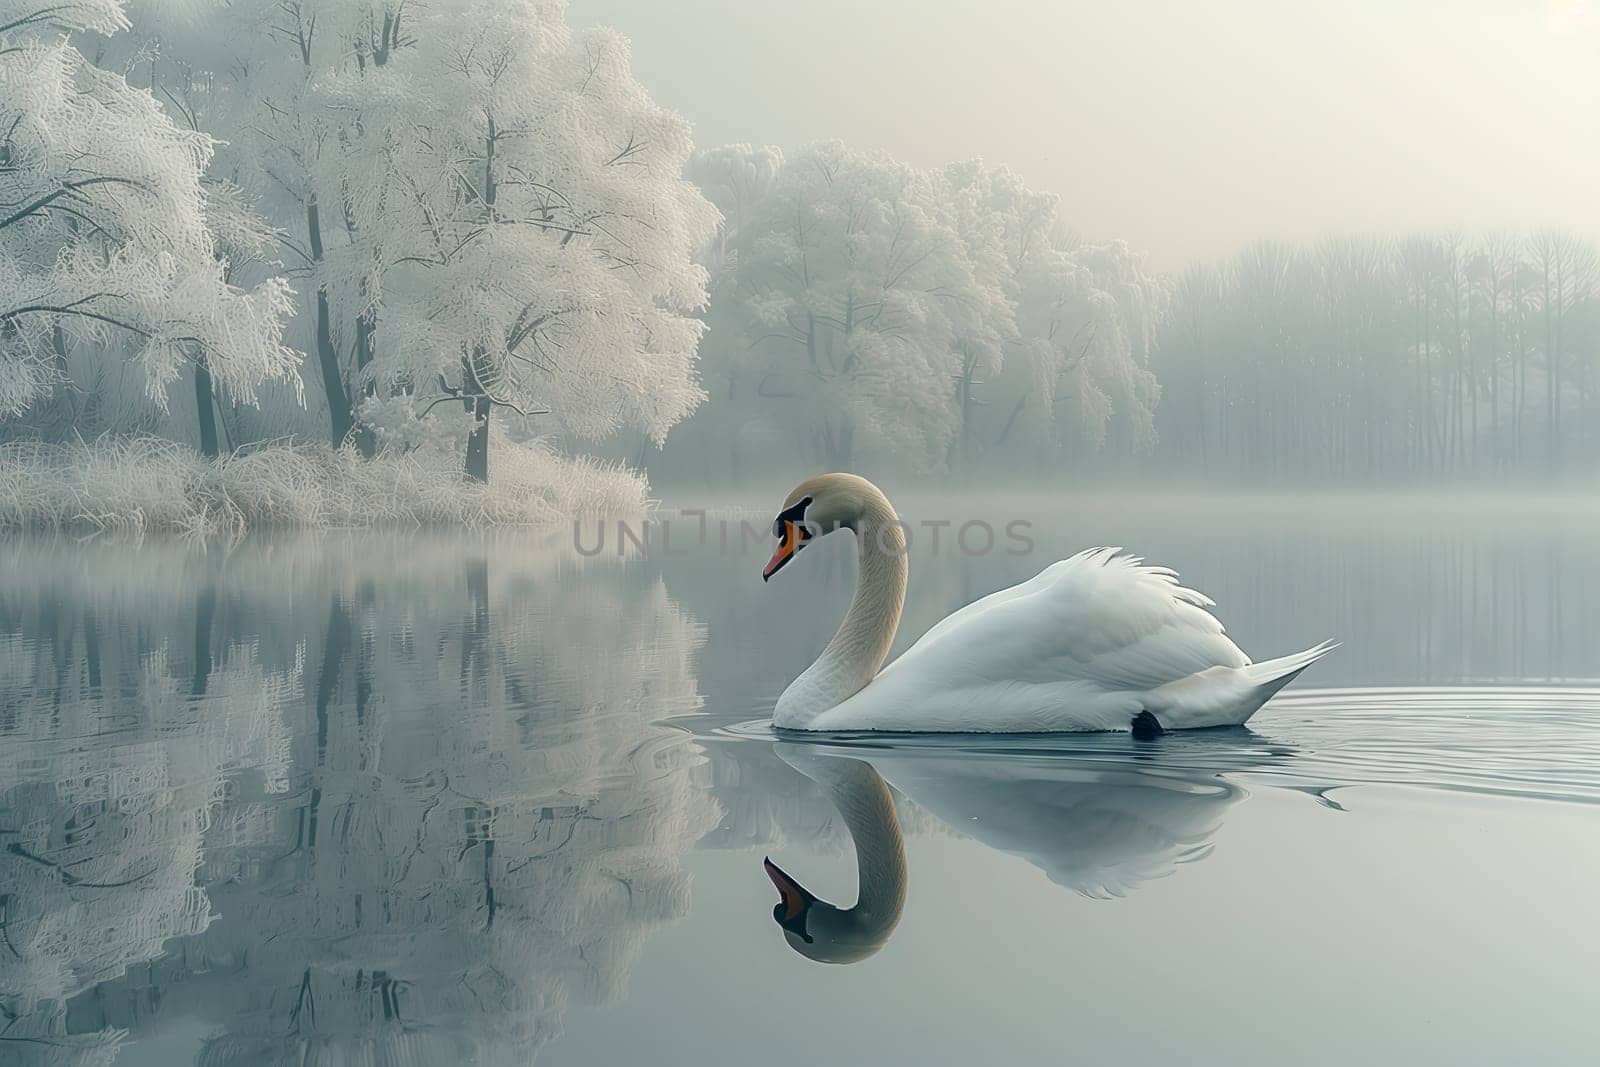 A graceful swan glides through the misty waters of the lake, alongside ducks, geese, and other waterfowl, surrounded by the serene beauty of the natural landscape